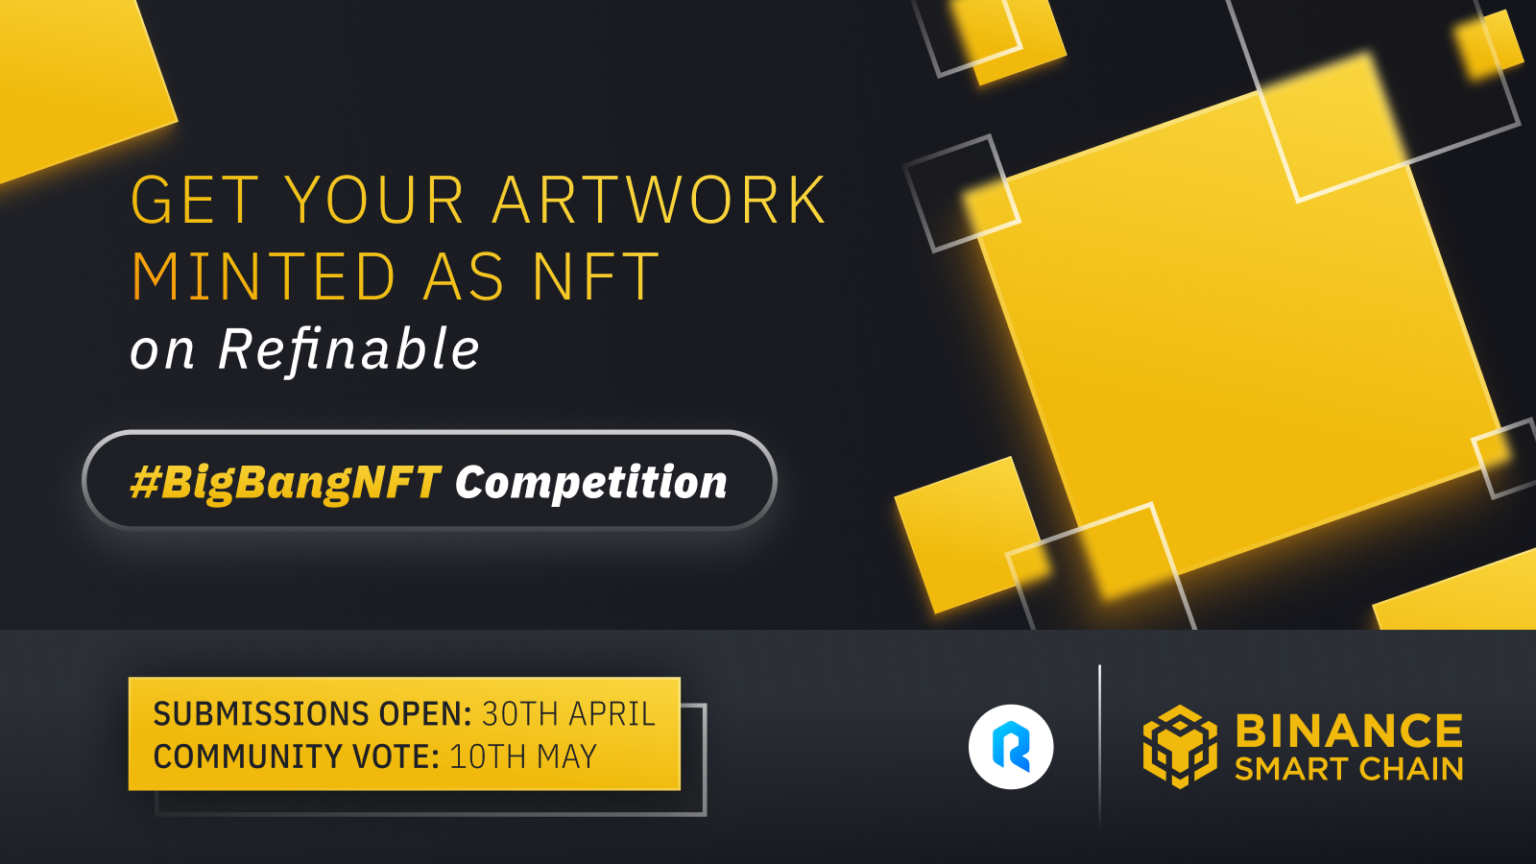 Binance and Refinable have unveiled the BigBangNFT ...